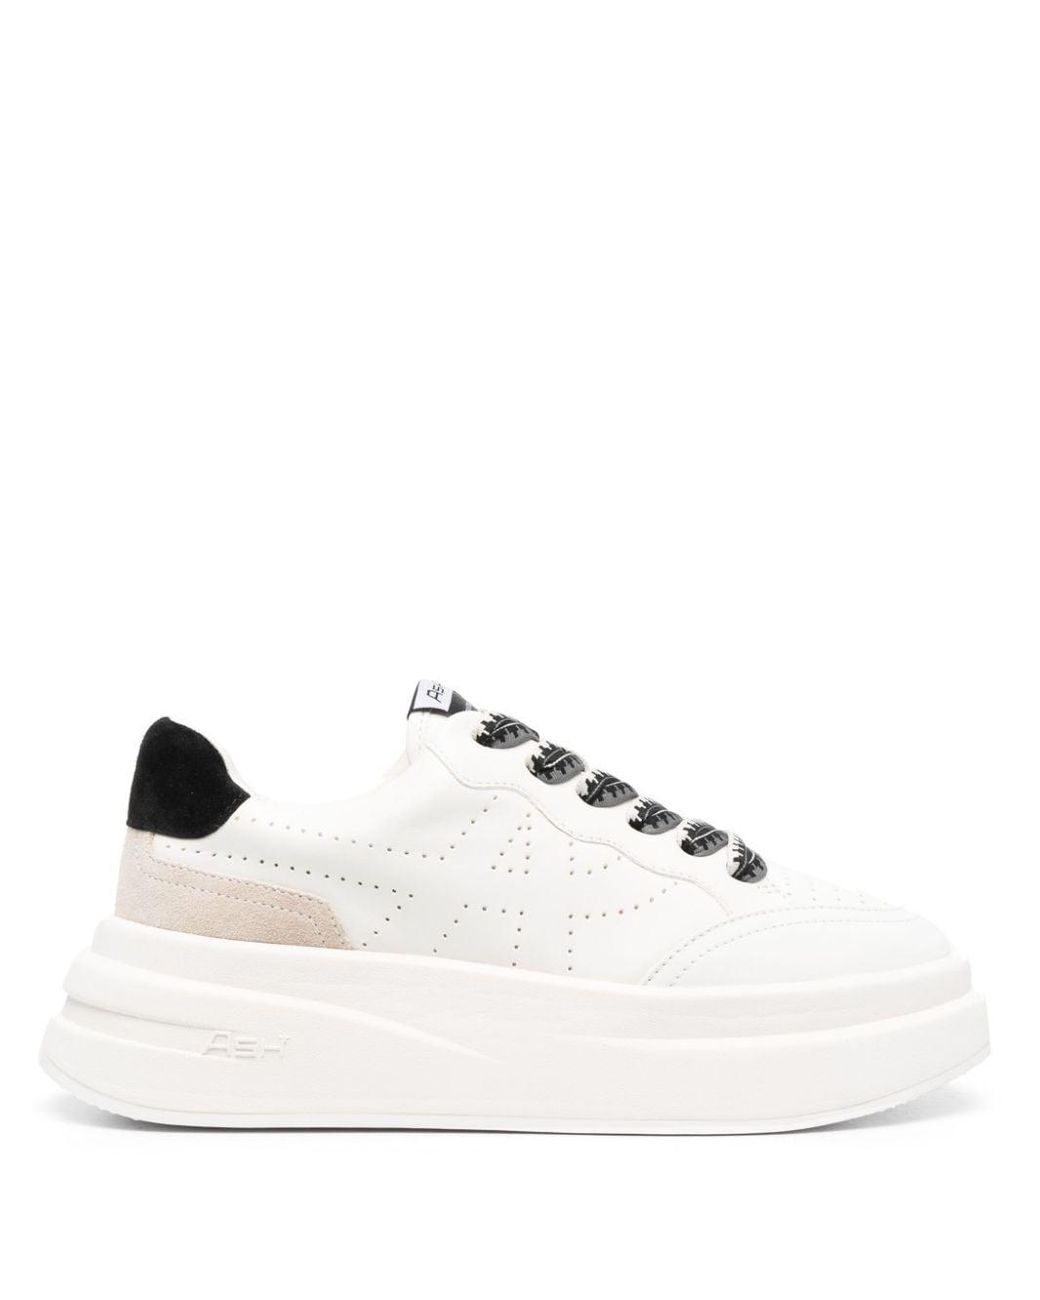 Afslut rapport Bloodstained Ash Impuls Flatform Leather Sneakers in White | Lyst